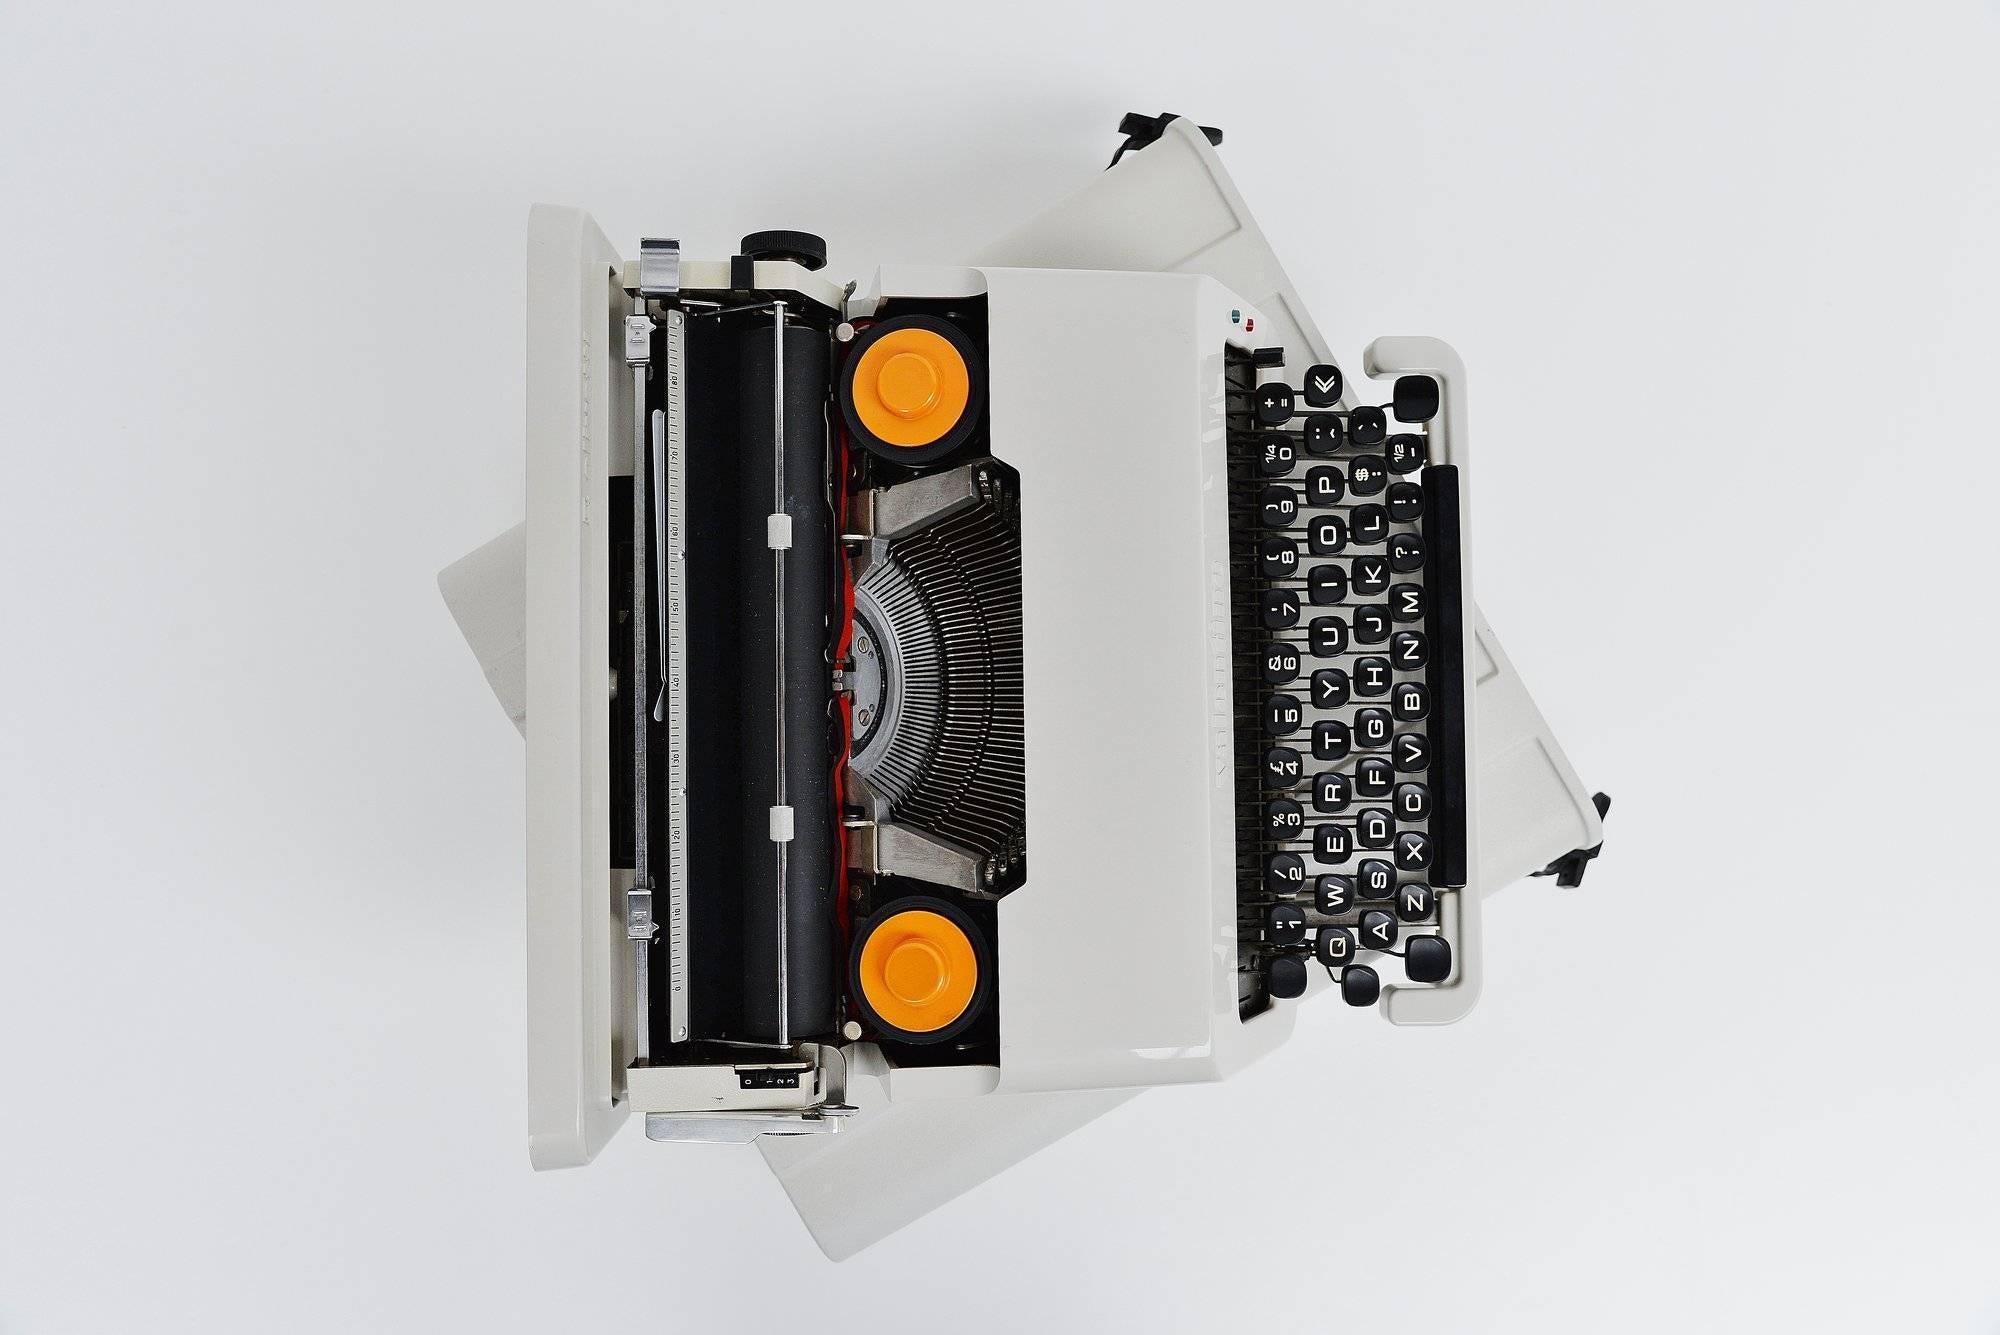 Early and rare grey edition of the famous 'Valentine' typewriter designed by Ettore Sottsass Jr. and manufactured by Olivetti, Italy 1969. This first edition was produced in Barcelona, the second edition was manufactured in Mexico. The Valentine